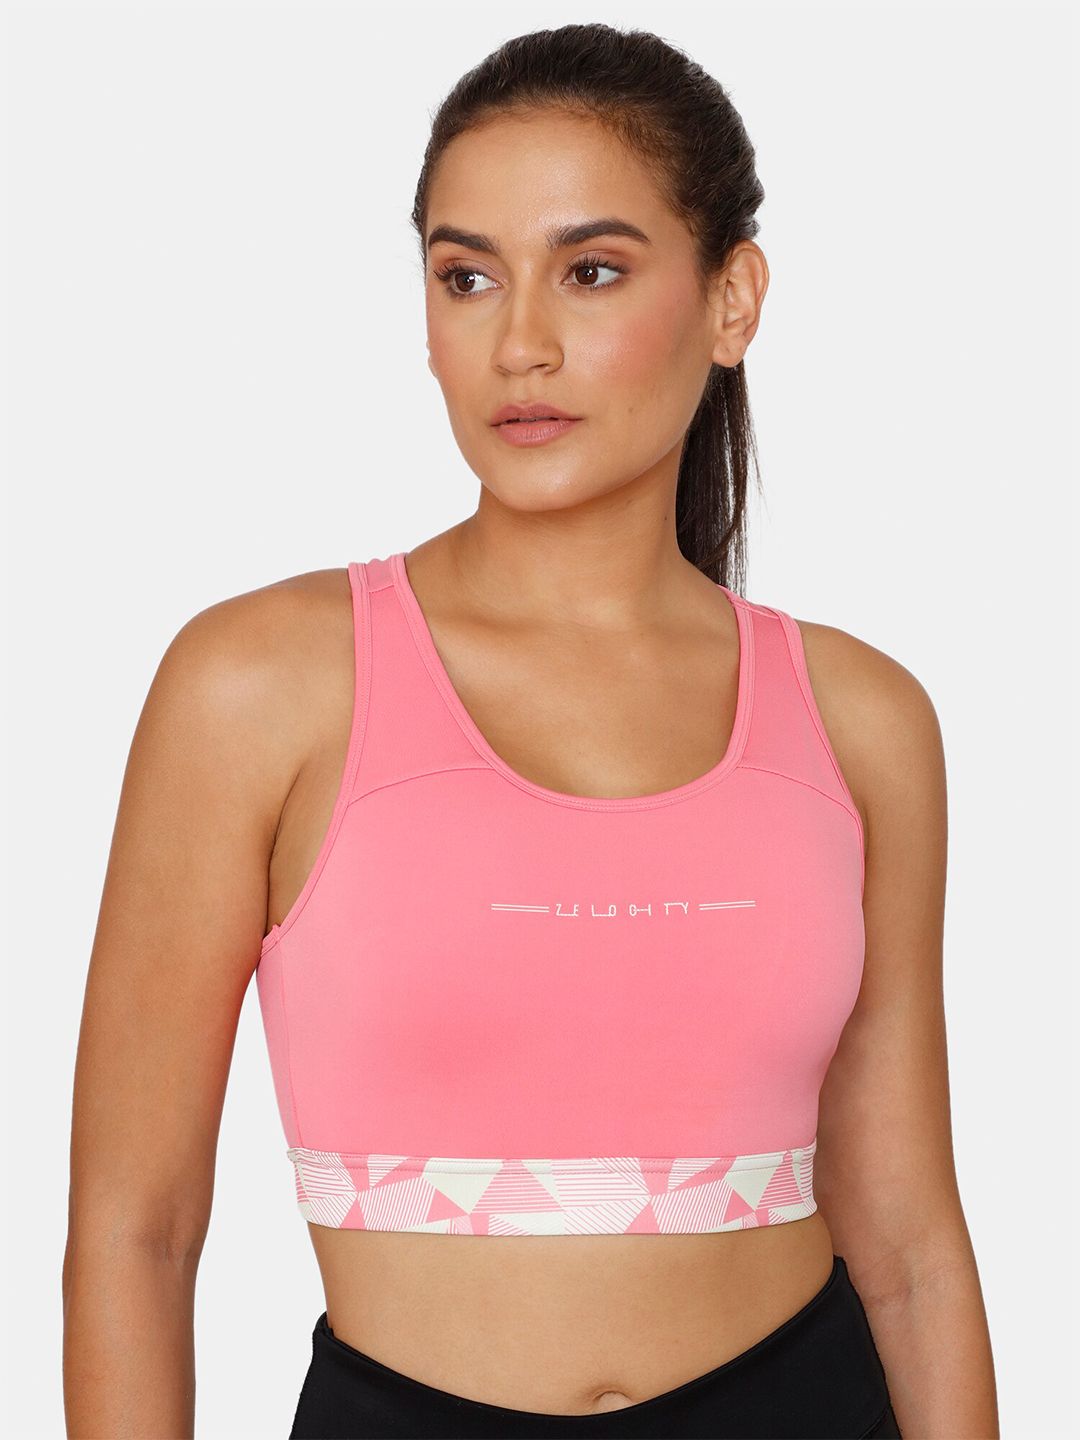 Zelocity by Zivame Pink Solid Workout Bra Price in India